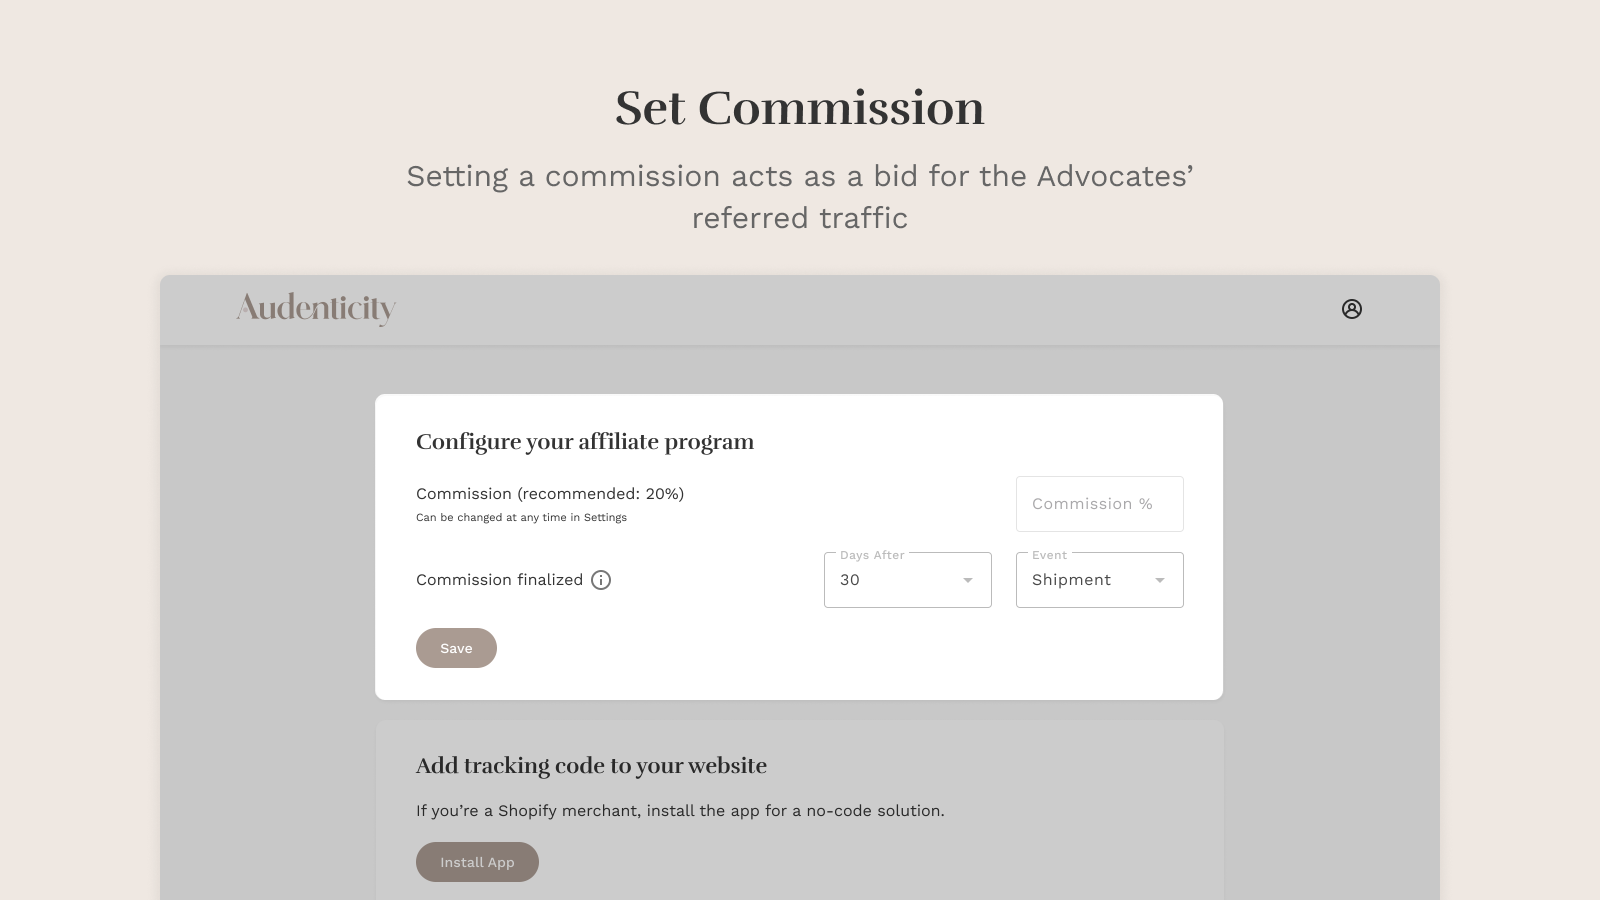 Set a commission to bid on customer traffic from Advocates